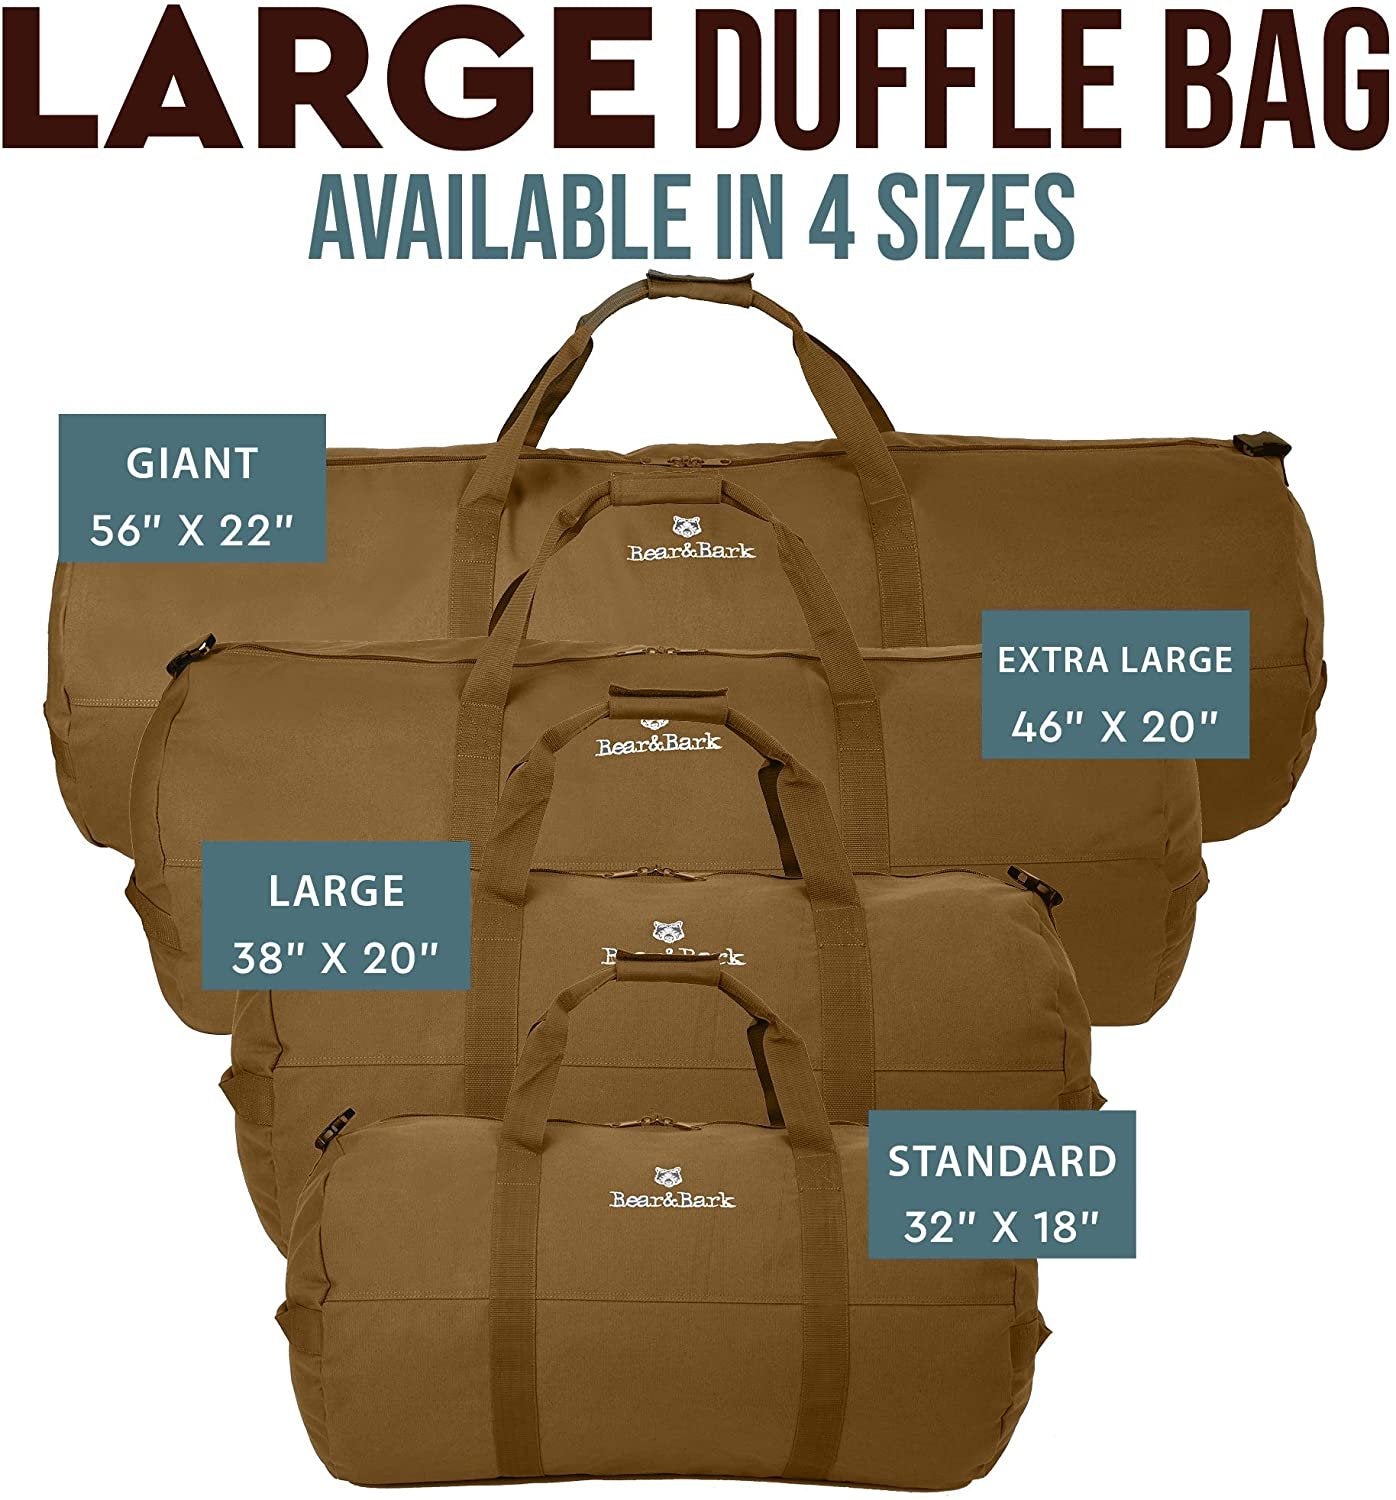 X-Large Military Canvas Duffel Bag - Olive Green 46x20 - Army Cargo Style Carryall for Men/Woman